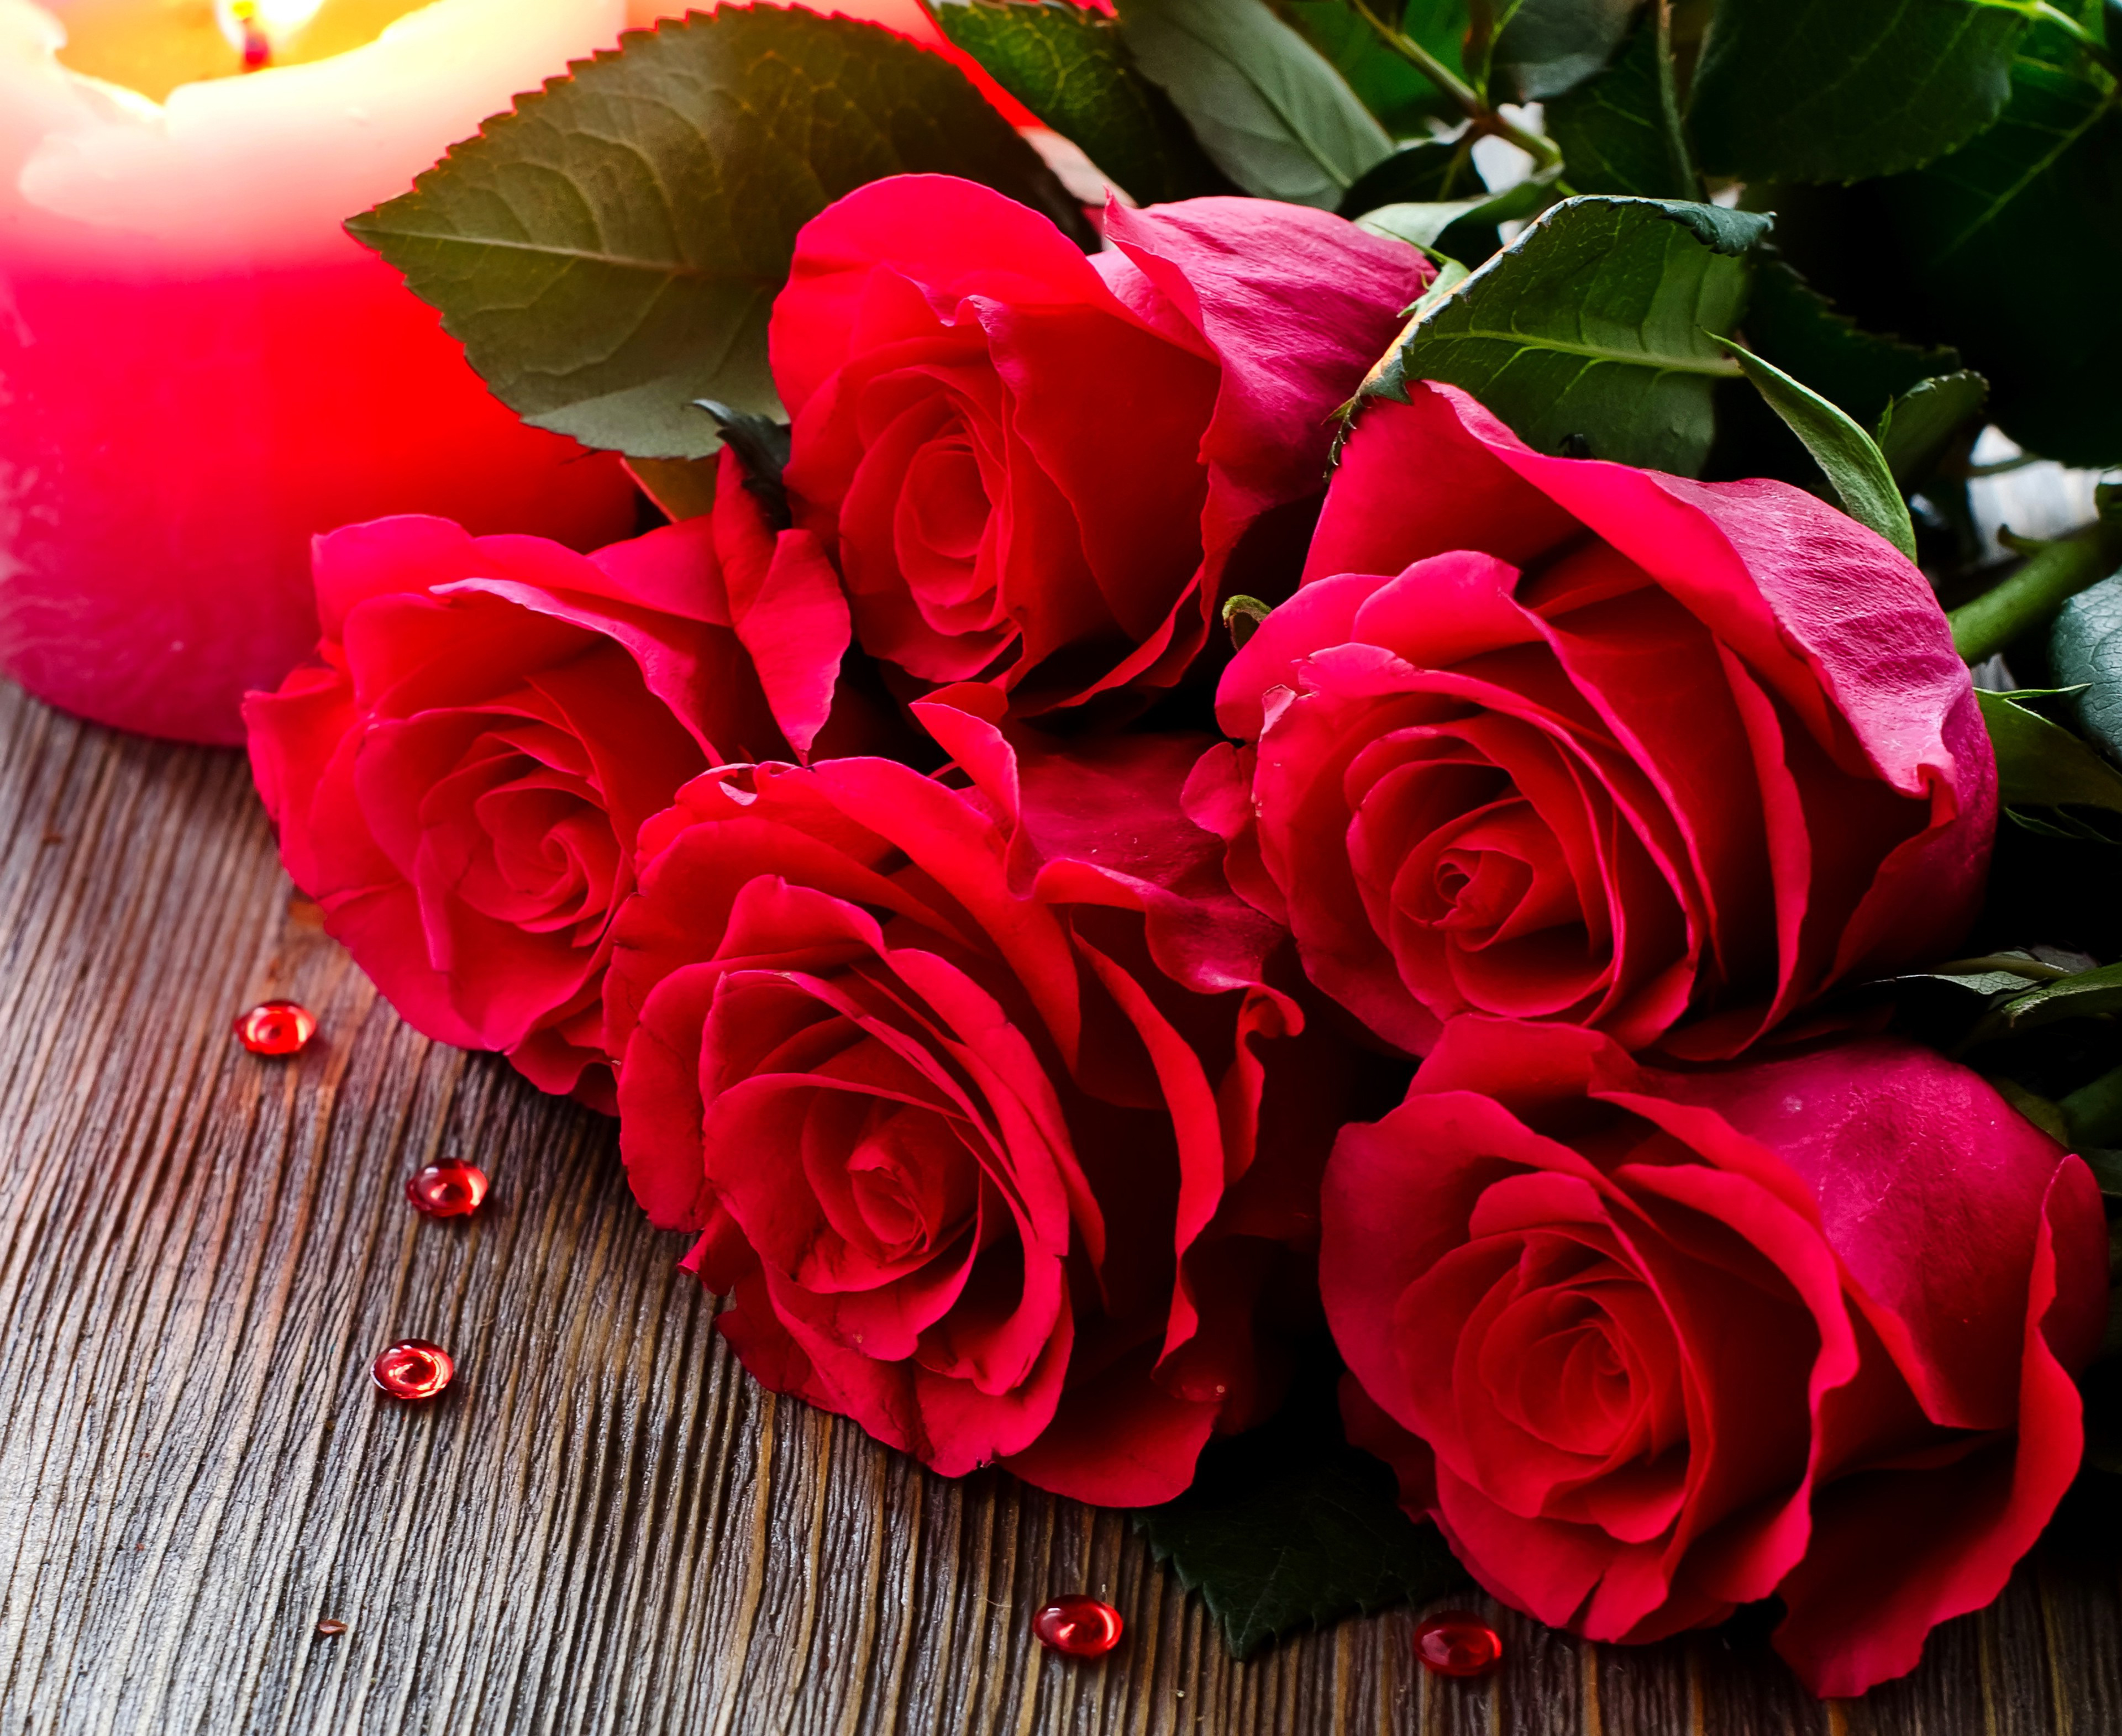 Love Love Roses Bunch wallpapers (Desktop, Phone, Tablet) - Awesome ...